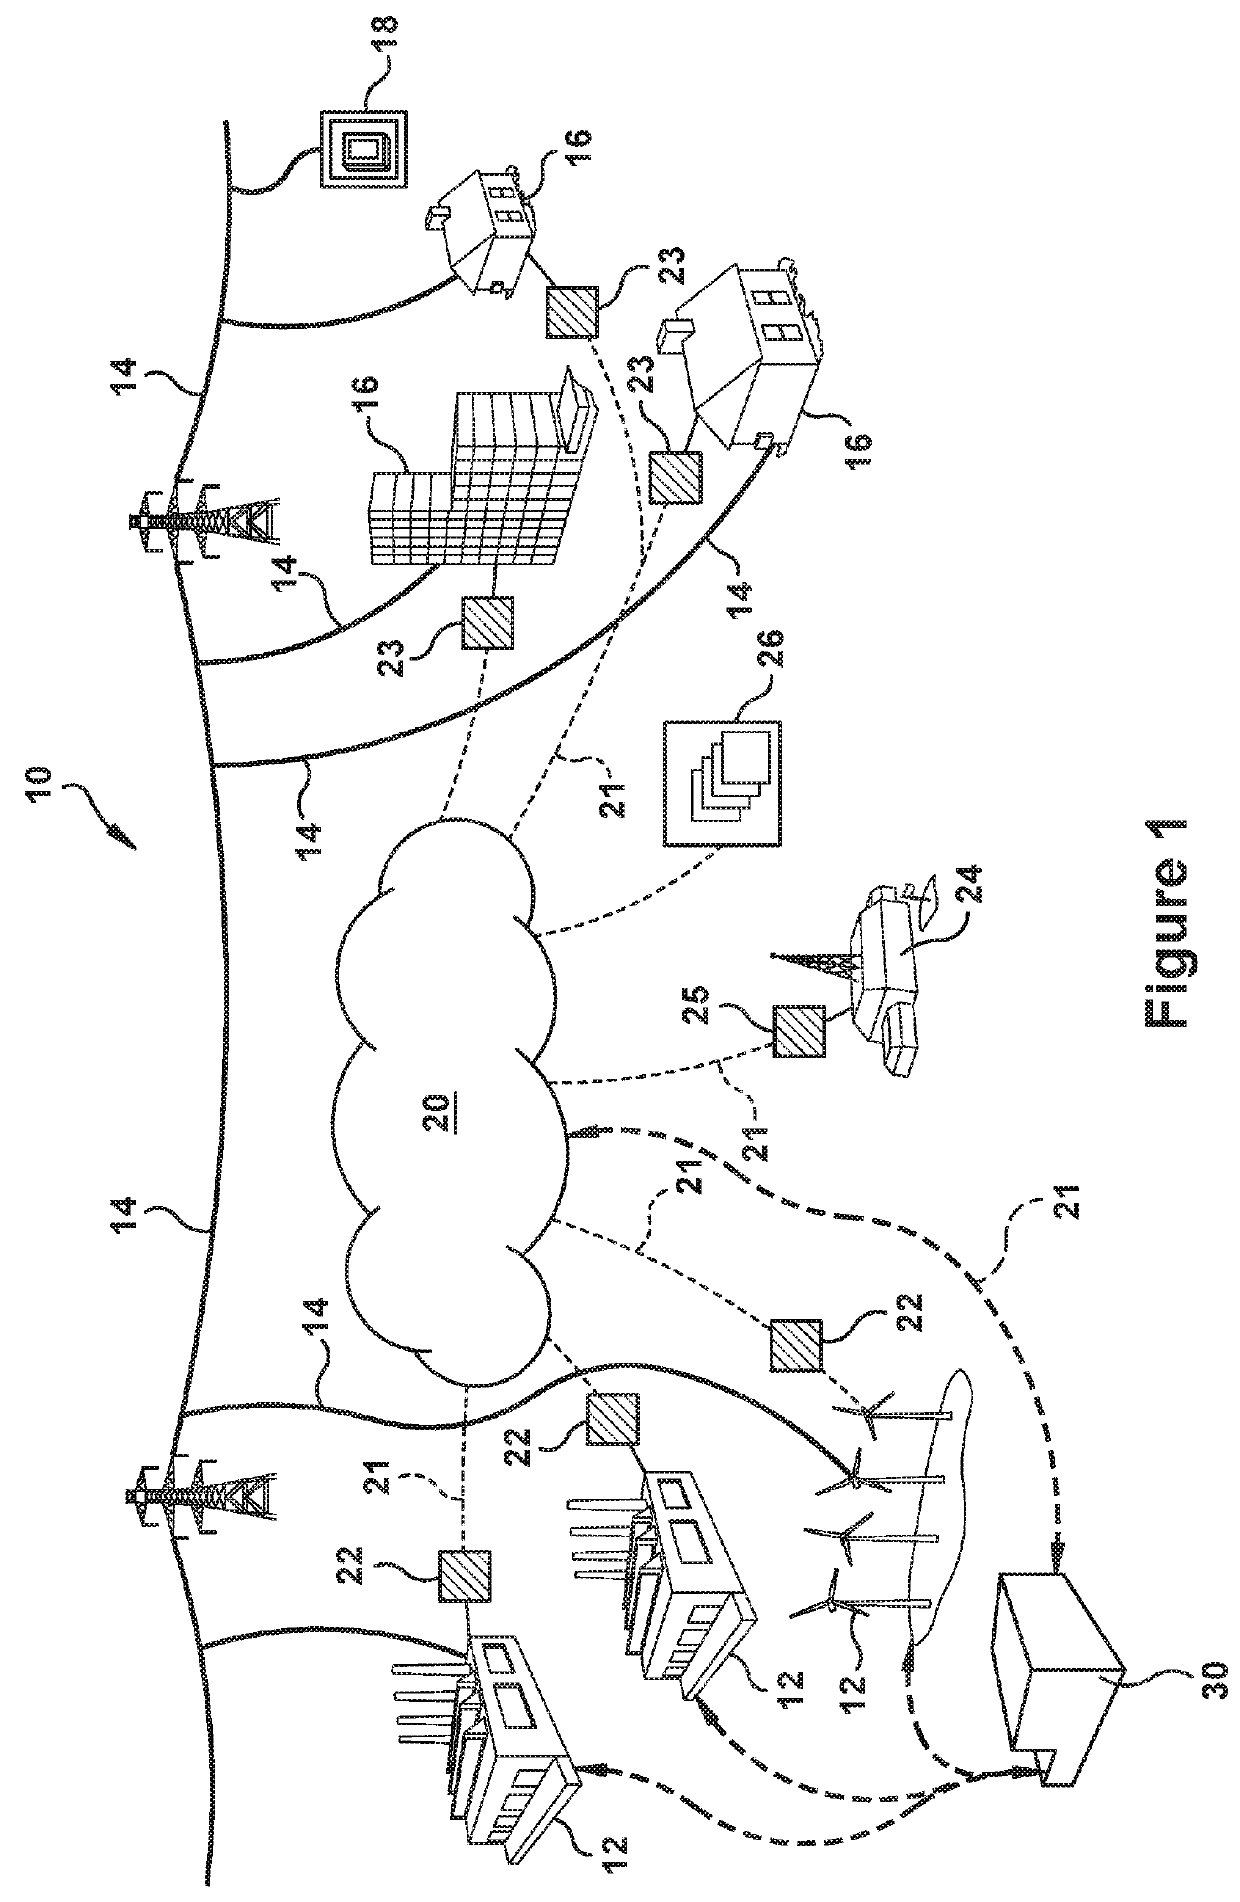 Methods and systems related to allocating field engineering resources for power plant maintenance